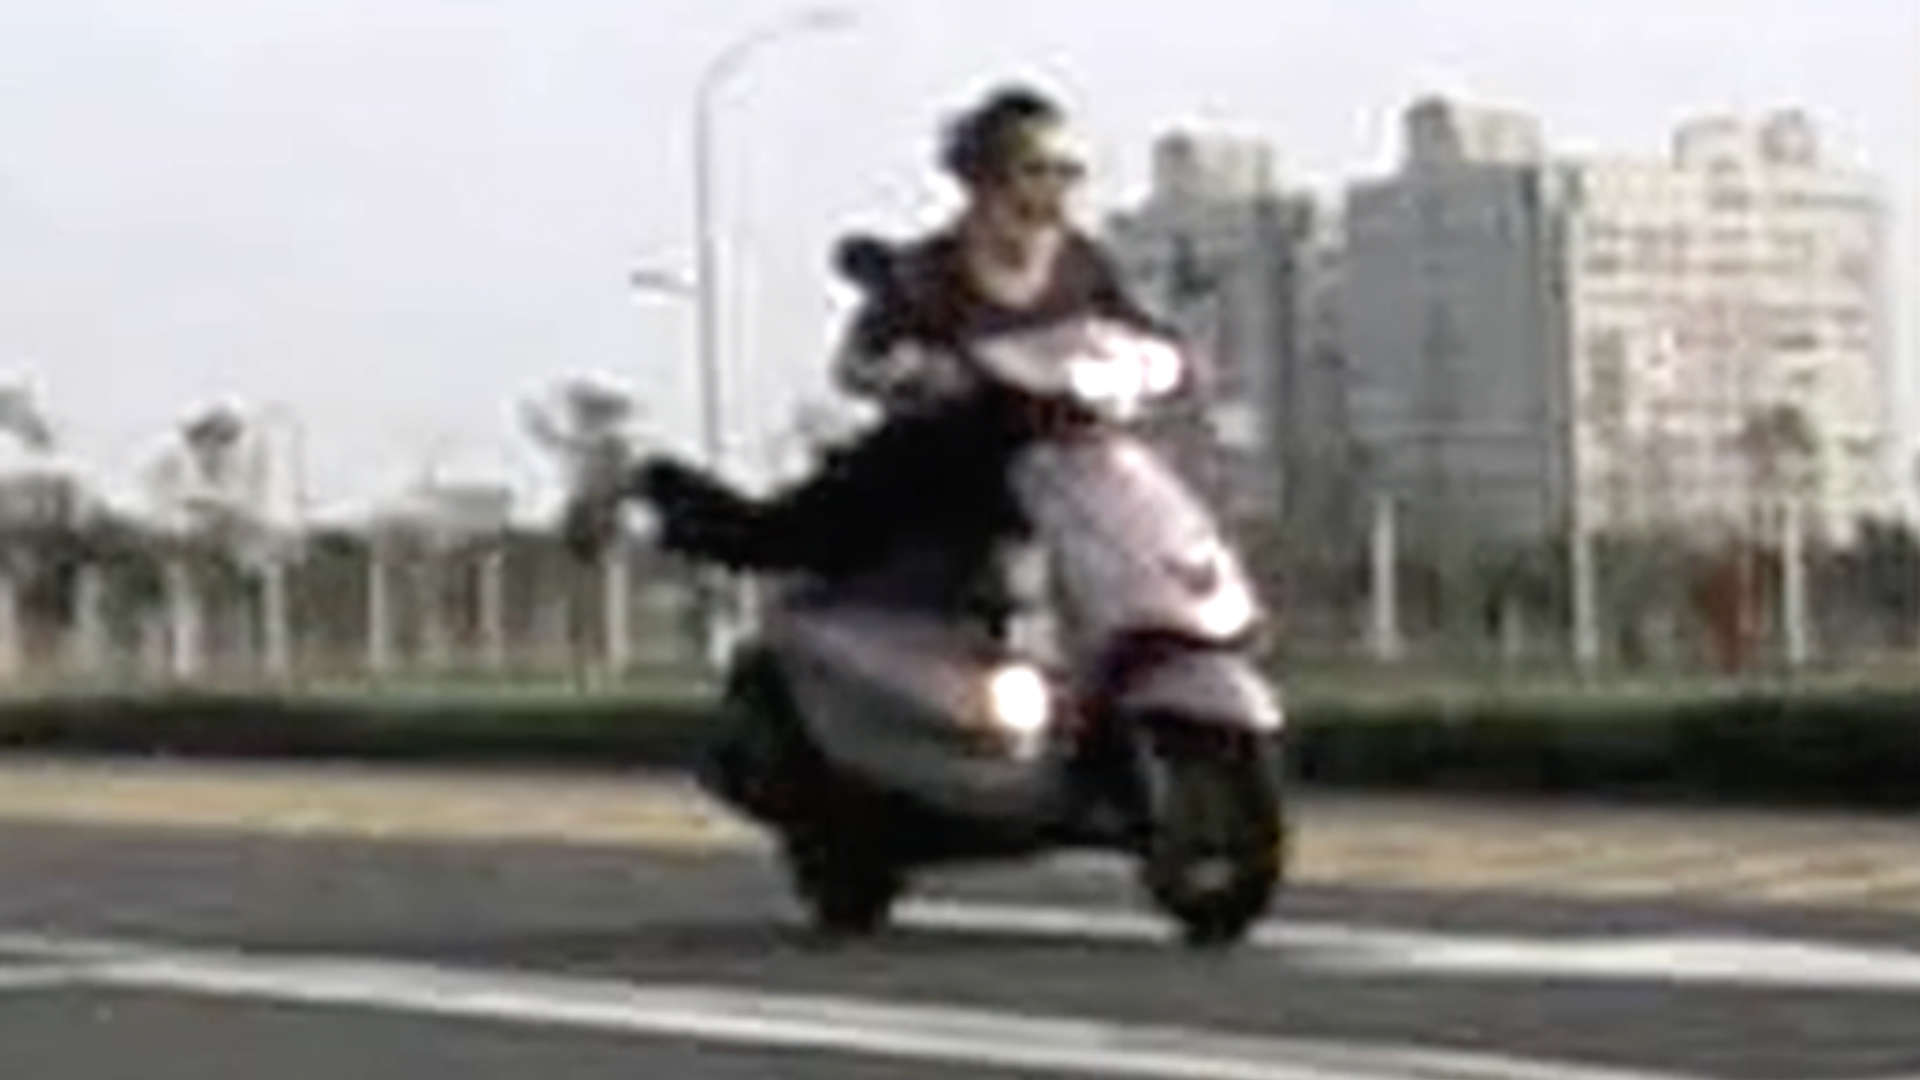 An elderly woman, without a helmet, riding a scooter face-down with feet stretched out behind her. Her hair is swept back by the wind as she rides. 